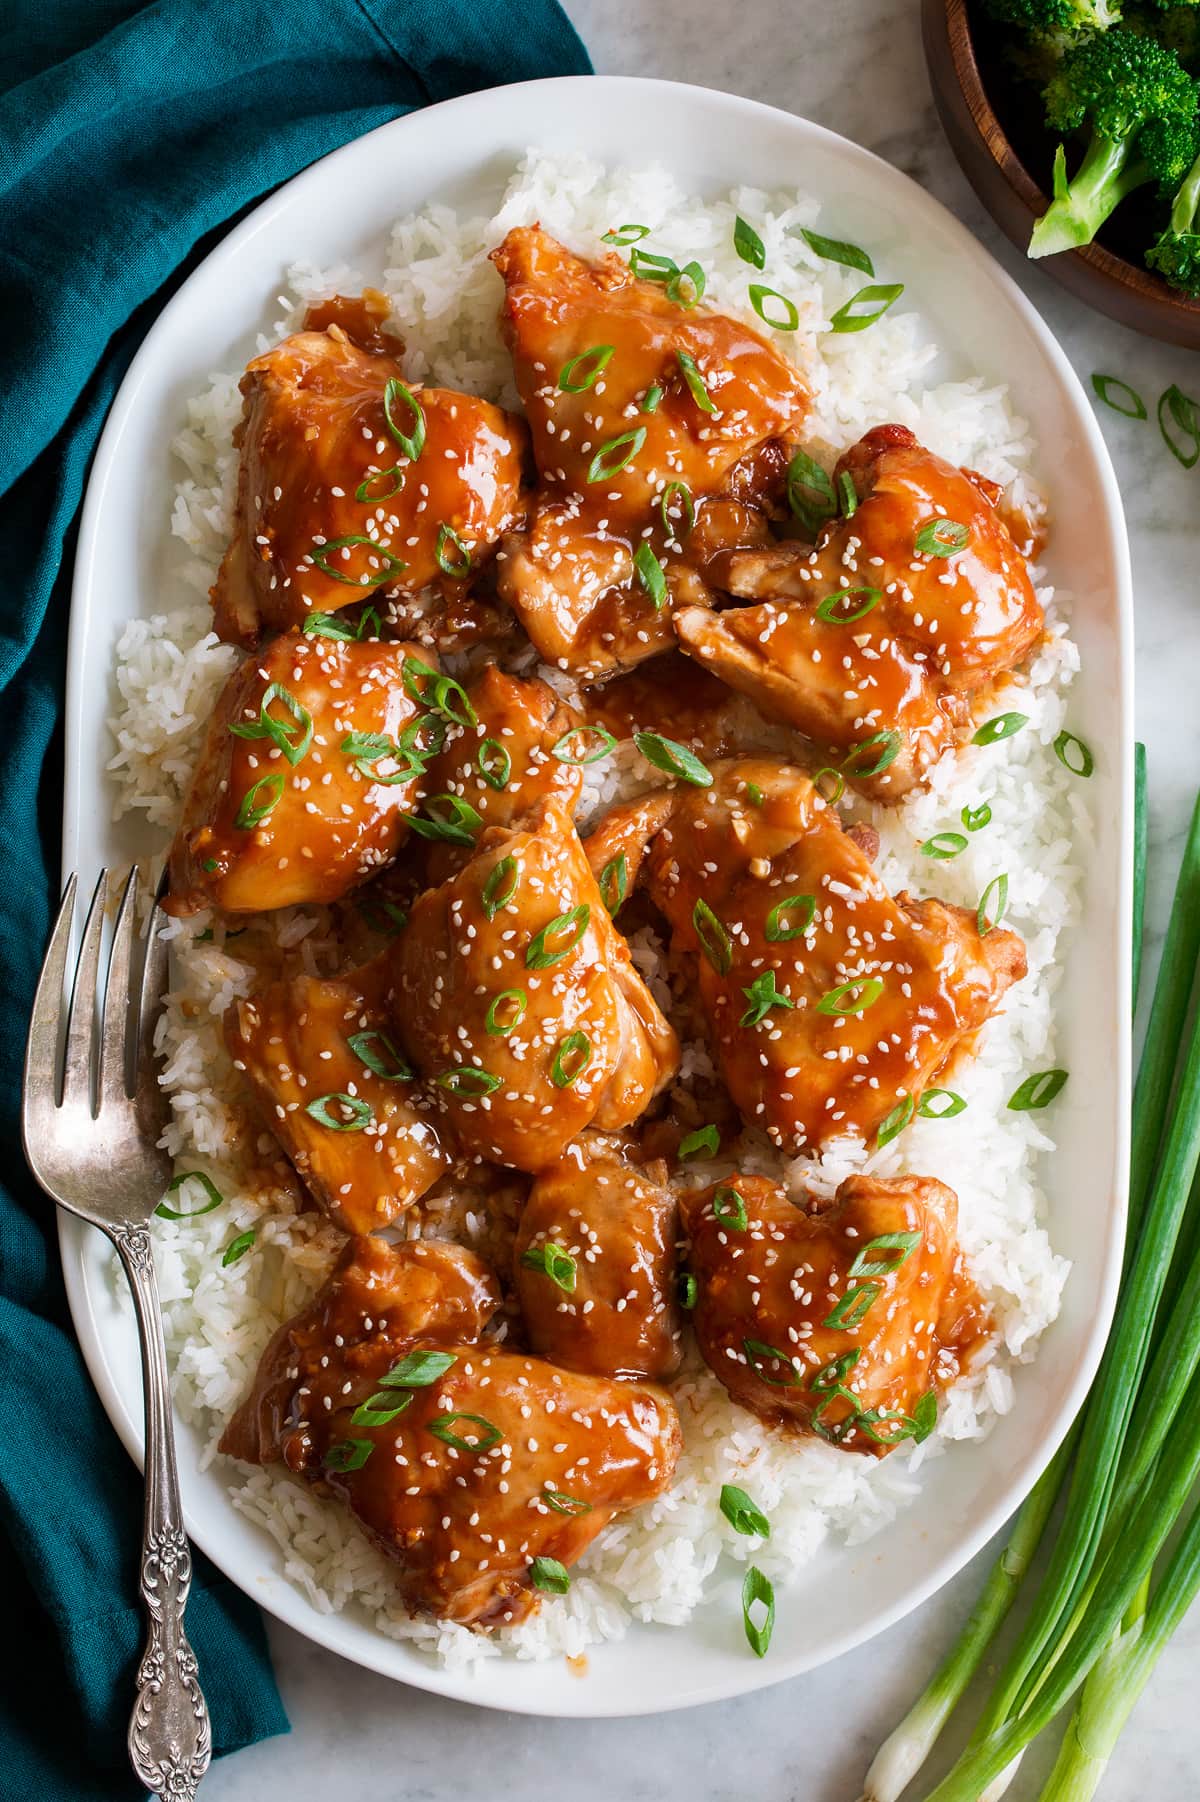 Slow-cooked chicken thighs with sauce served over white rice in a white oval dish. The dish is on a marble surface with a blue cloth and green onions on one side.